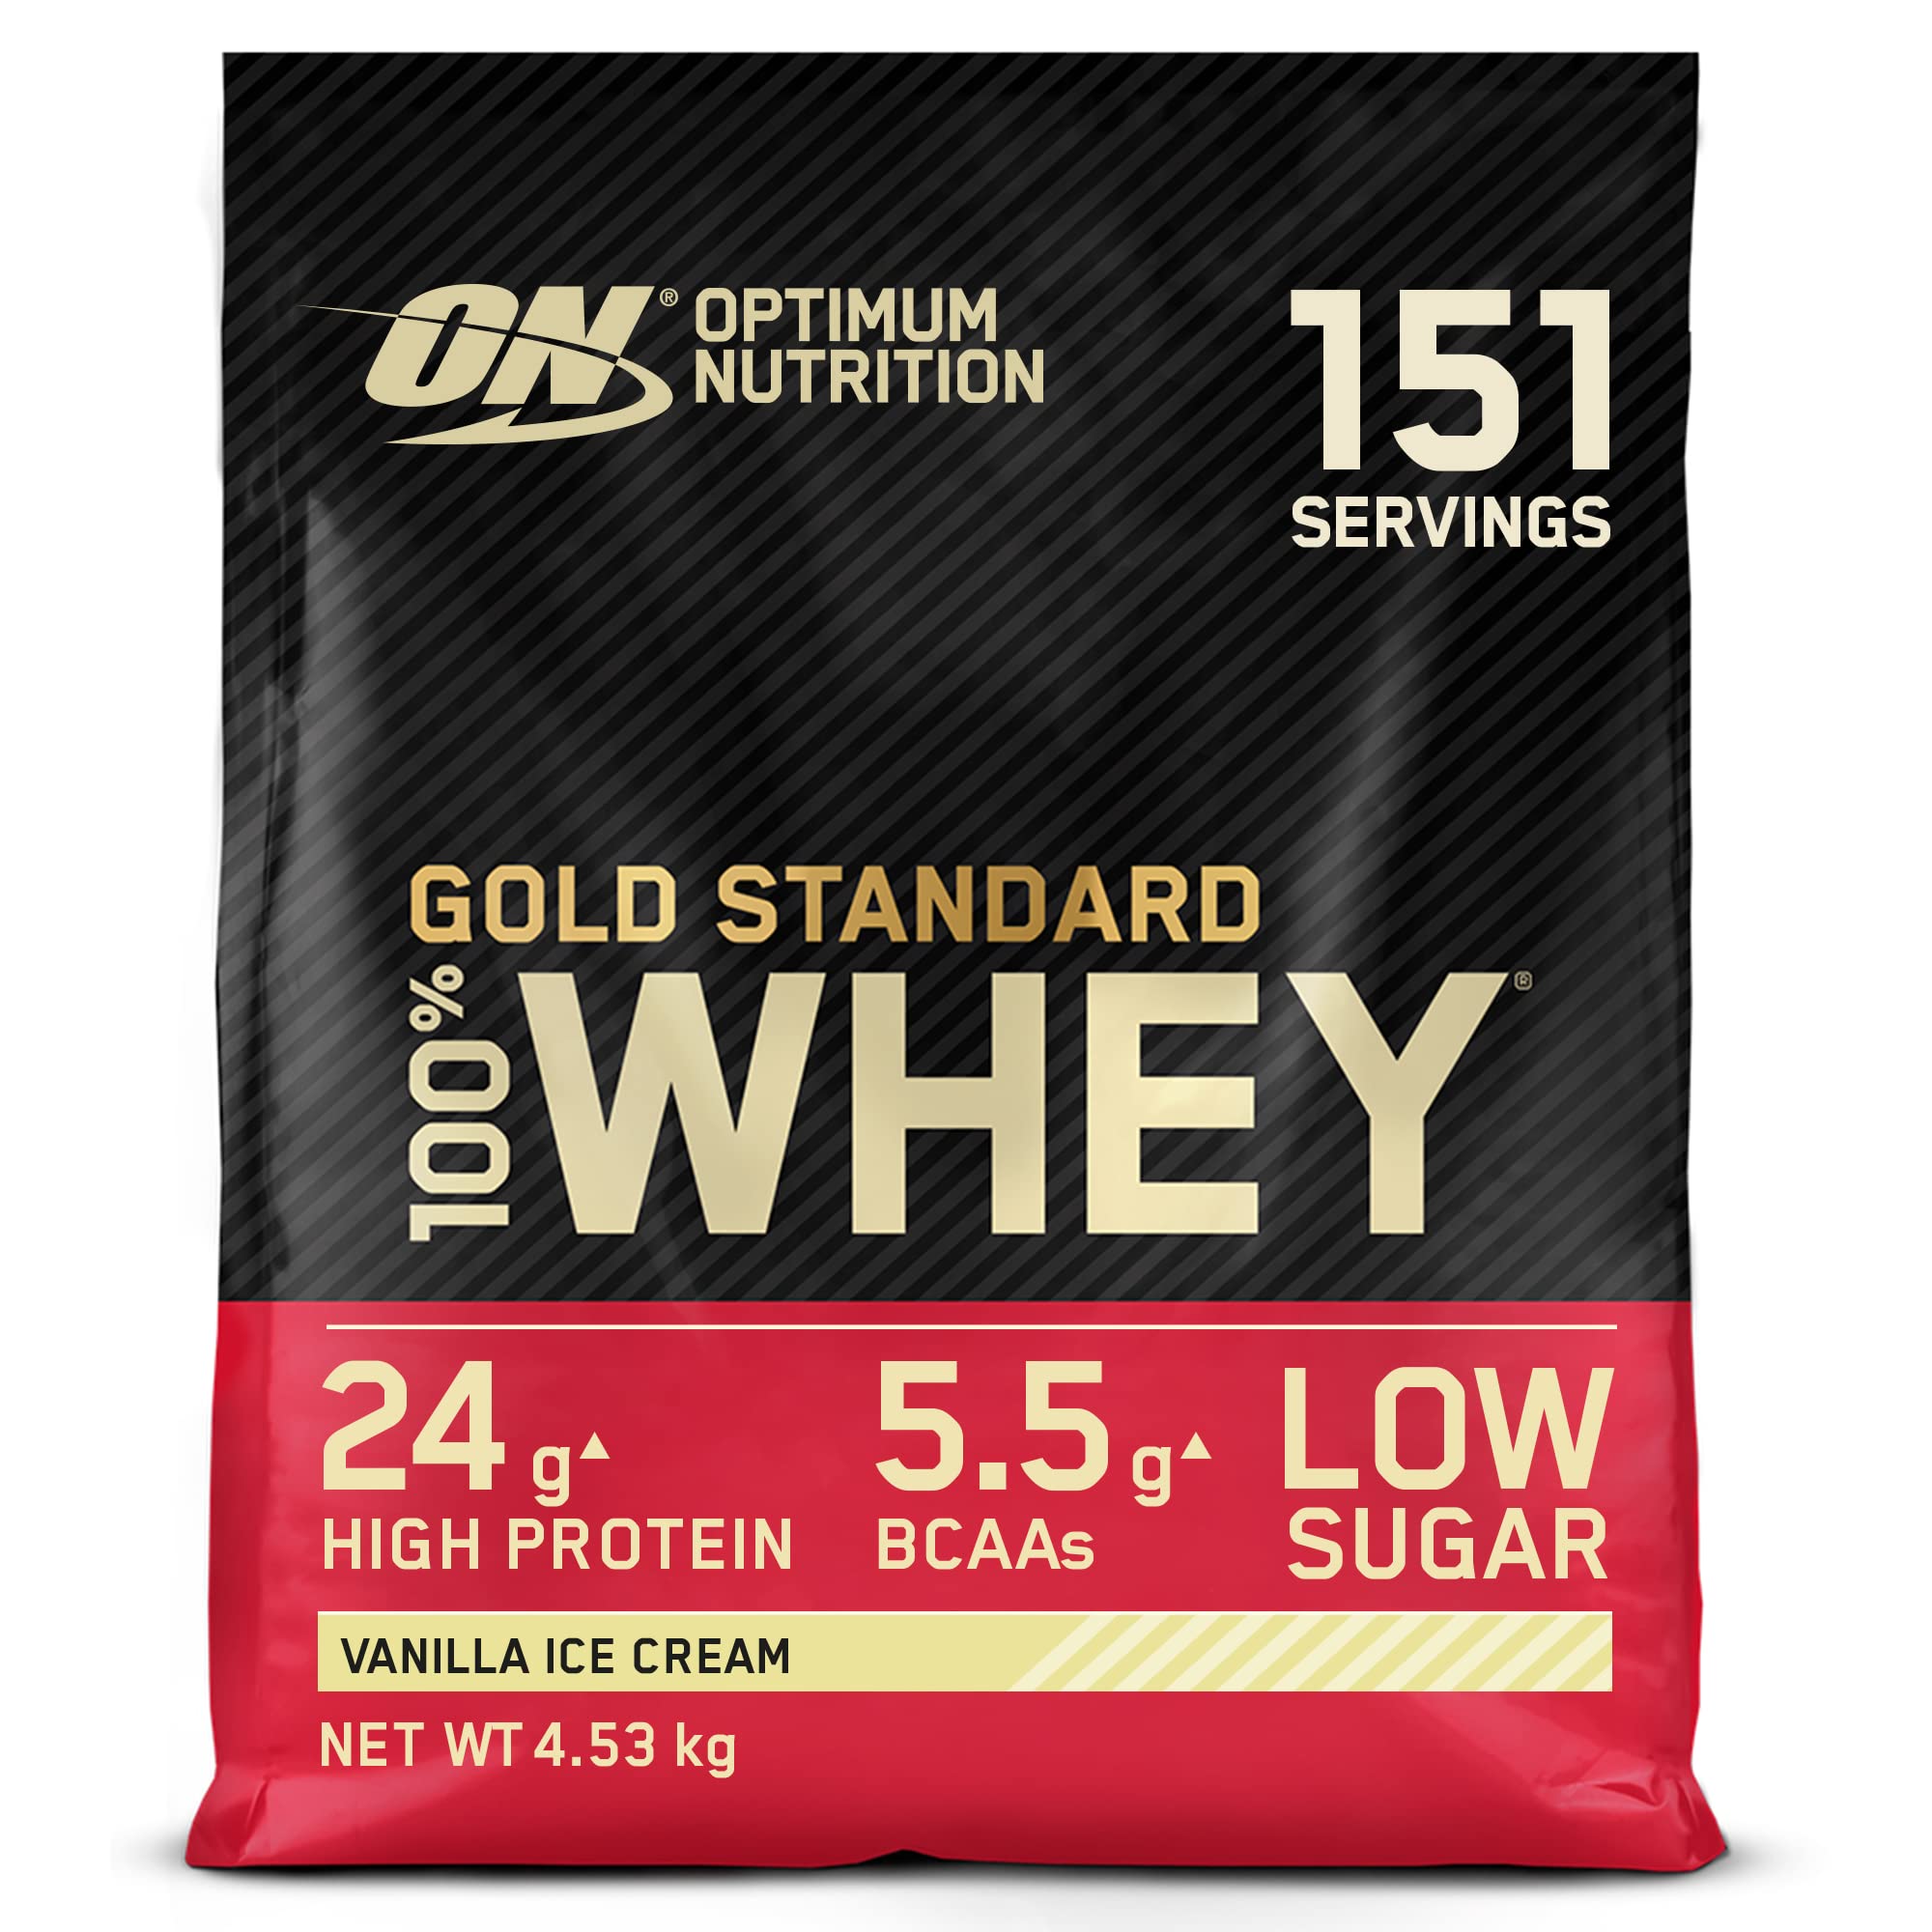 Optimum Nutrition Gold Standard Whey Protein, Muscle Building Powder With Naturally Occurring Glutamine and Amino Acids, Vanilla Ice Cream, 151 Servings, 4.53kg, Packaging May Vary